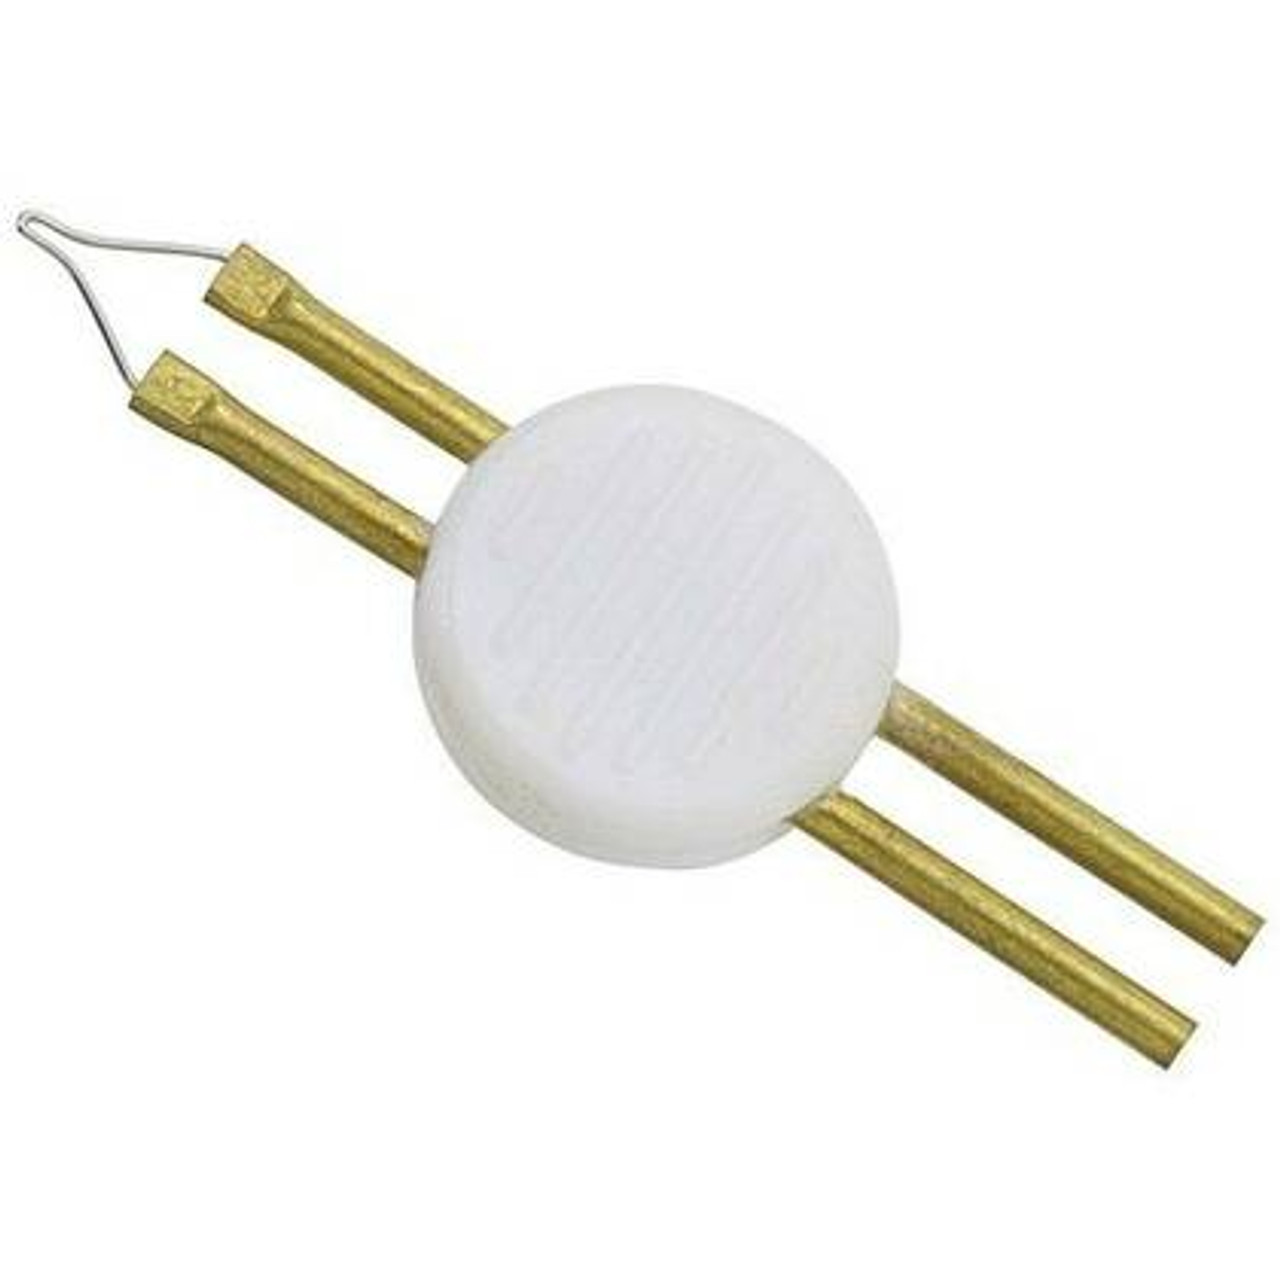 Thread Burner Tips Thread Zapper and Melt Thread with One Touch